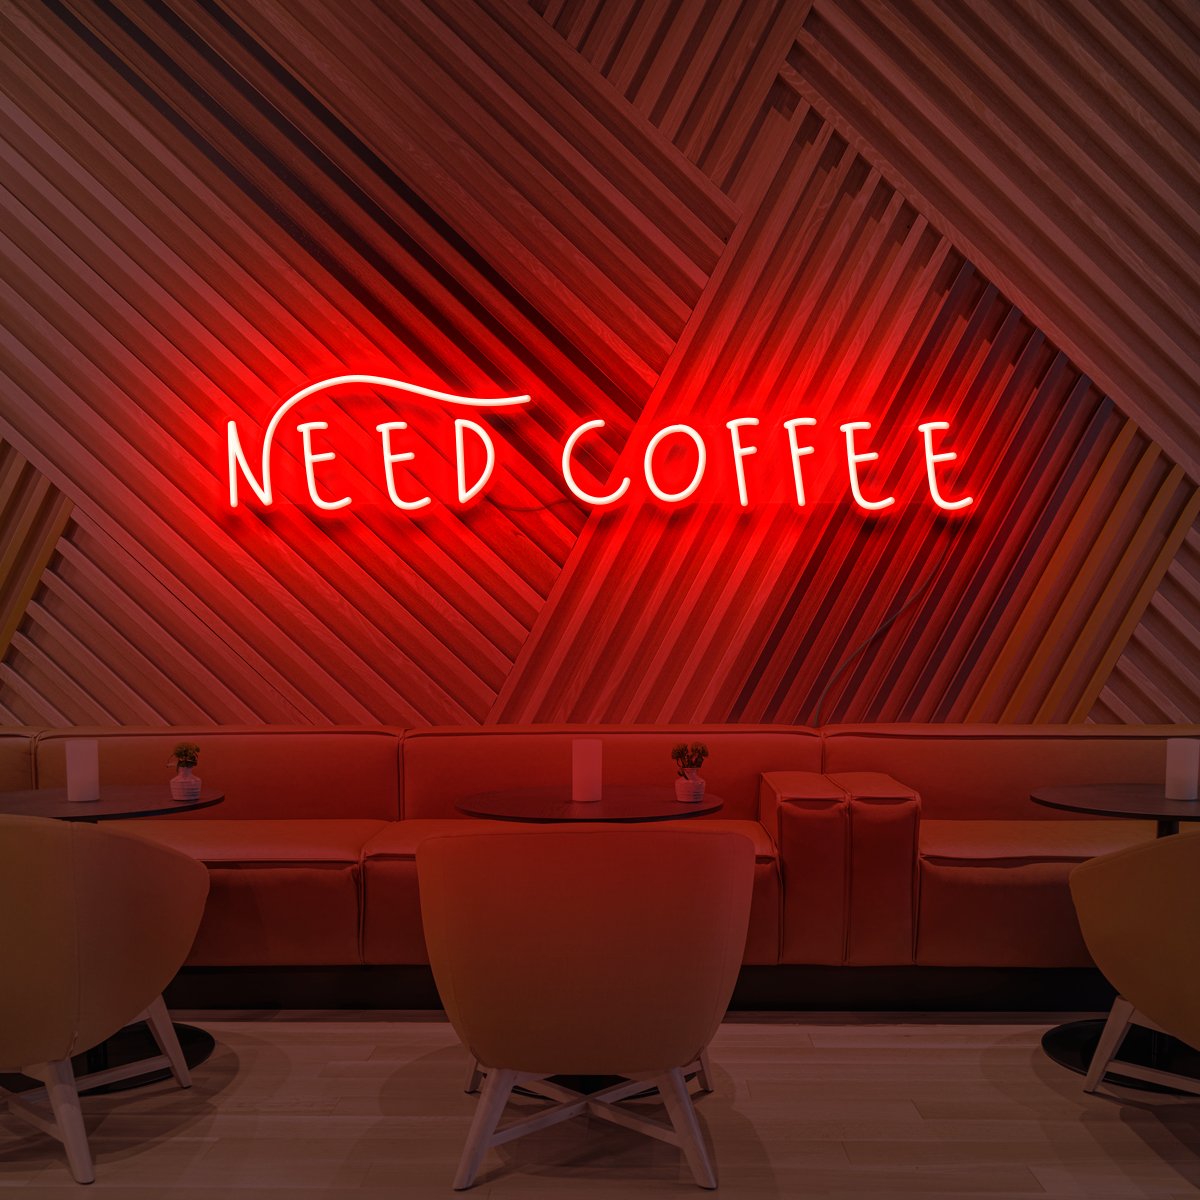 "Need Coffee" Neon Sign for Cafés 60cm (2ft) / Red / LED Neon by Neon Icons